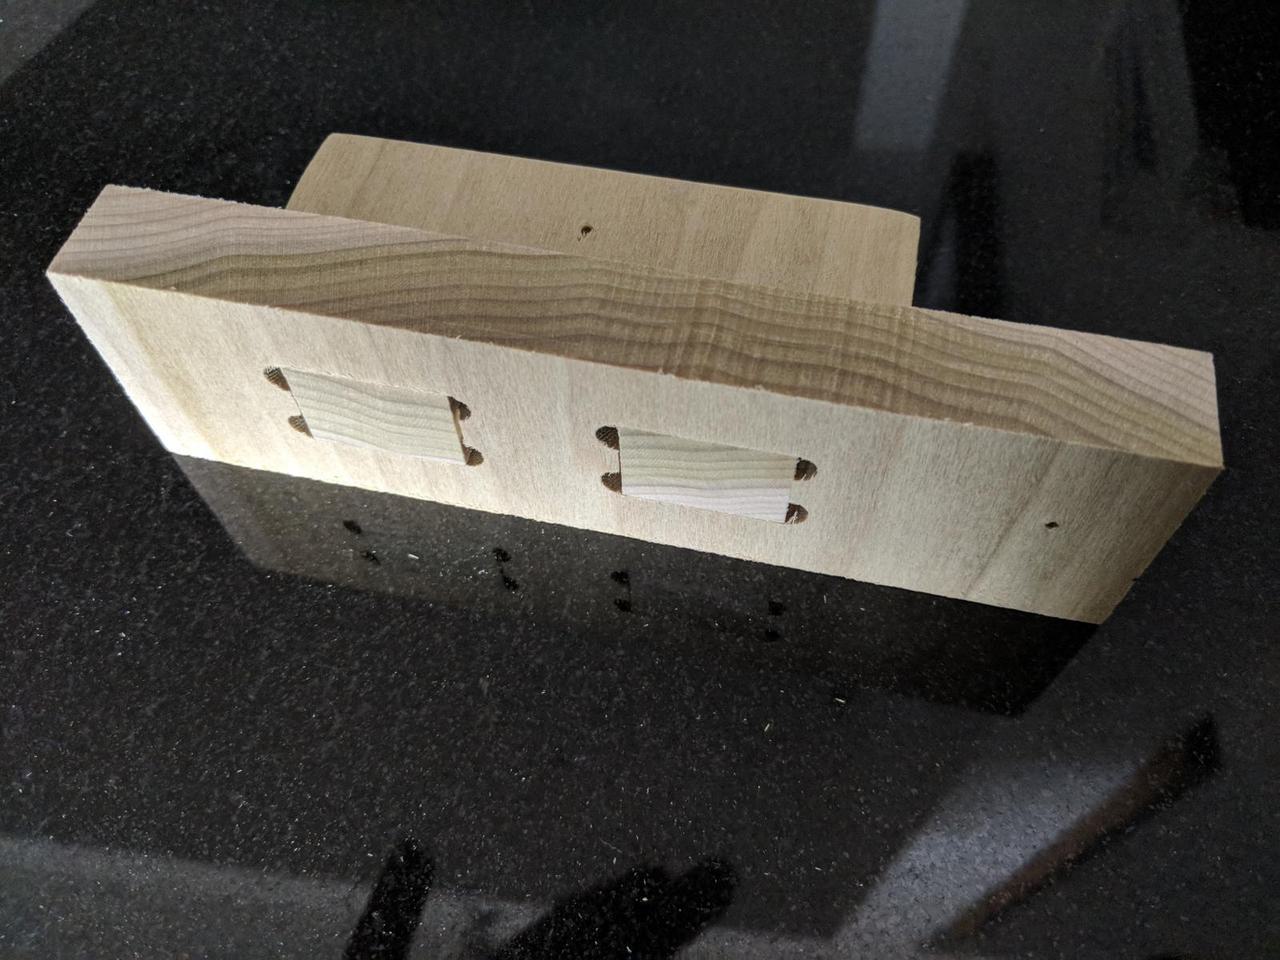 Two pieces of 0.5 inch wood joined together. The wood with the protrusions is inserted into the one with the holes. The view is from the side.